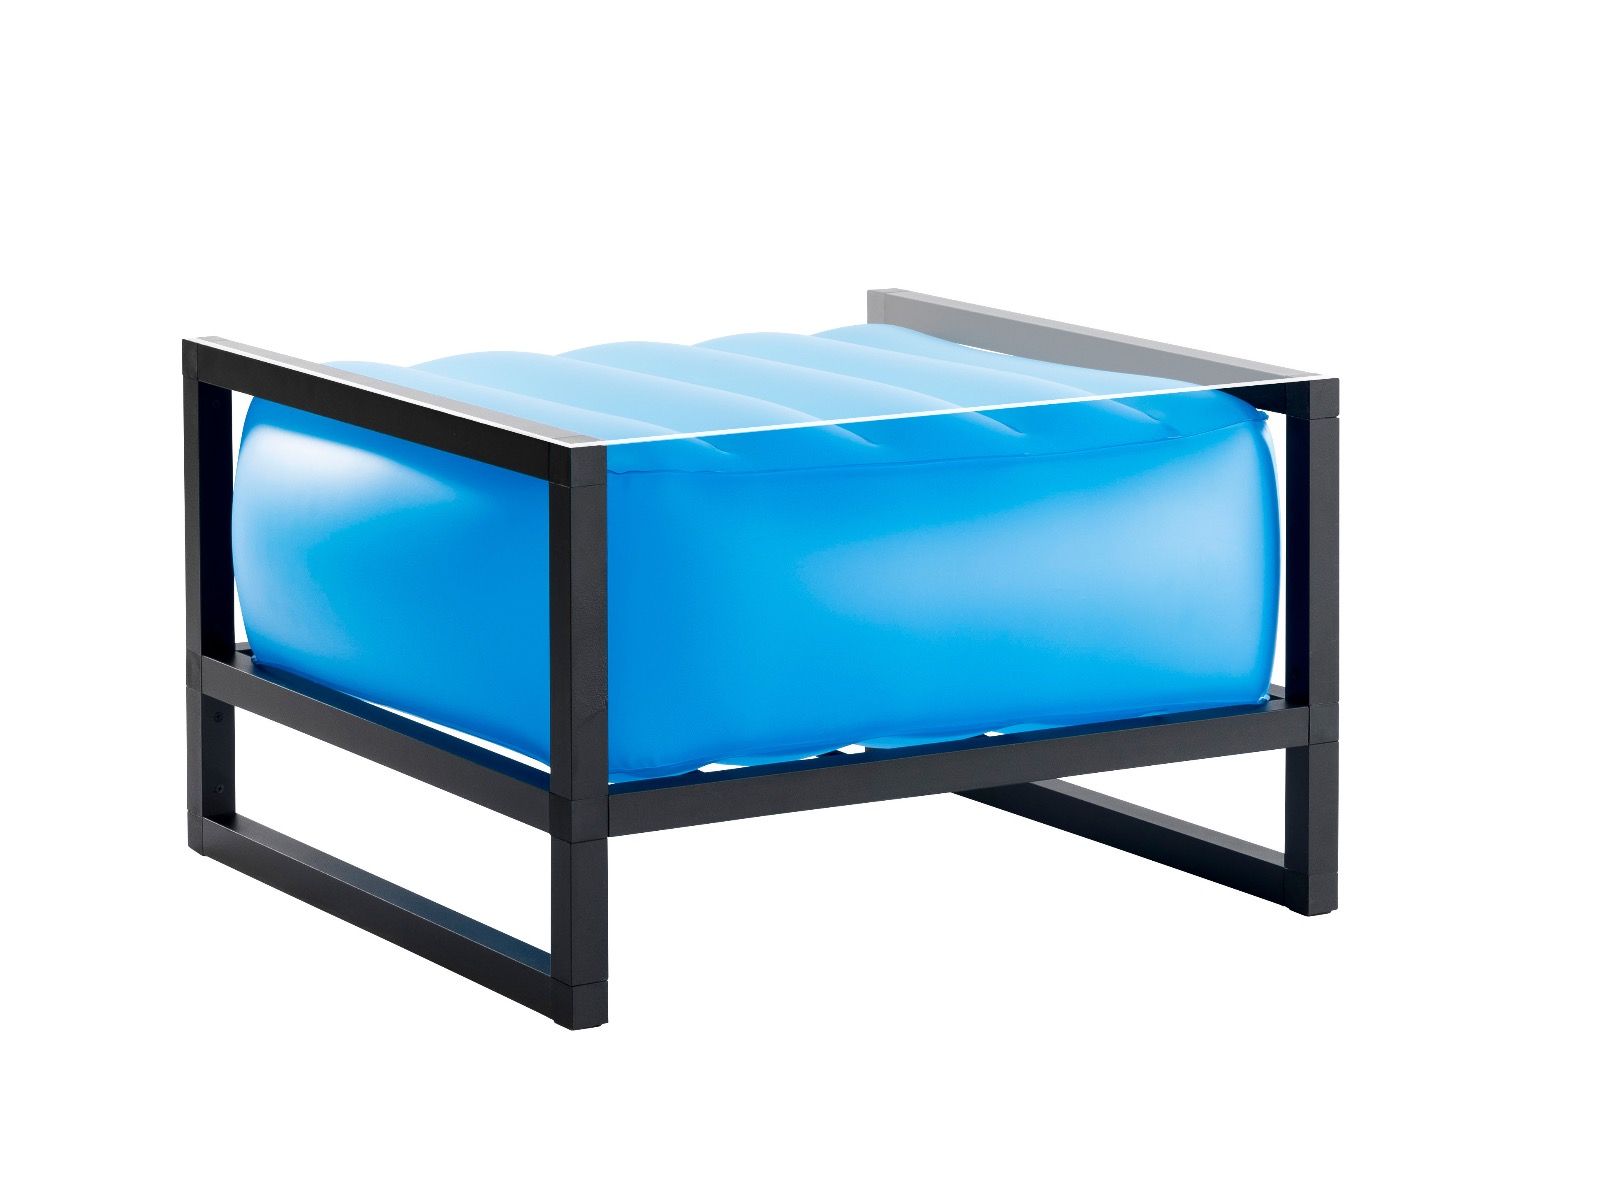 YOMI EKO TABLE WITH LIGHTING - BLACK WOODEN STRUCTURE - BLUE